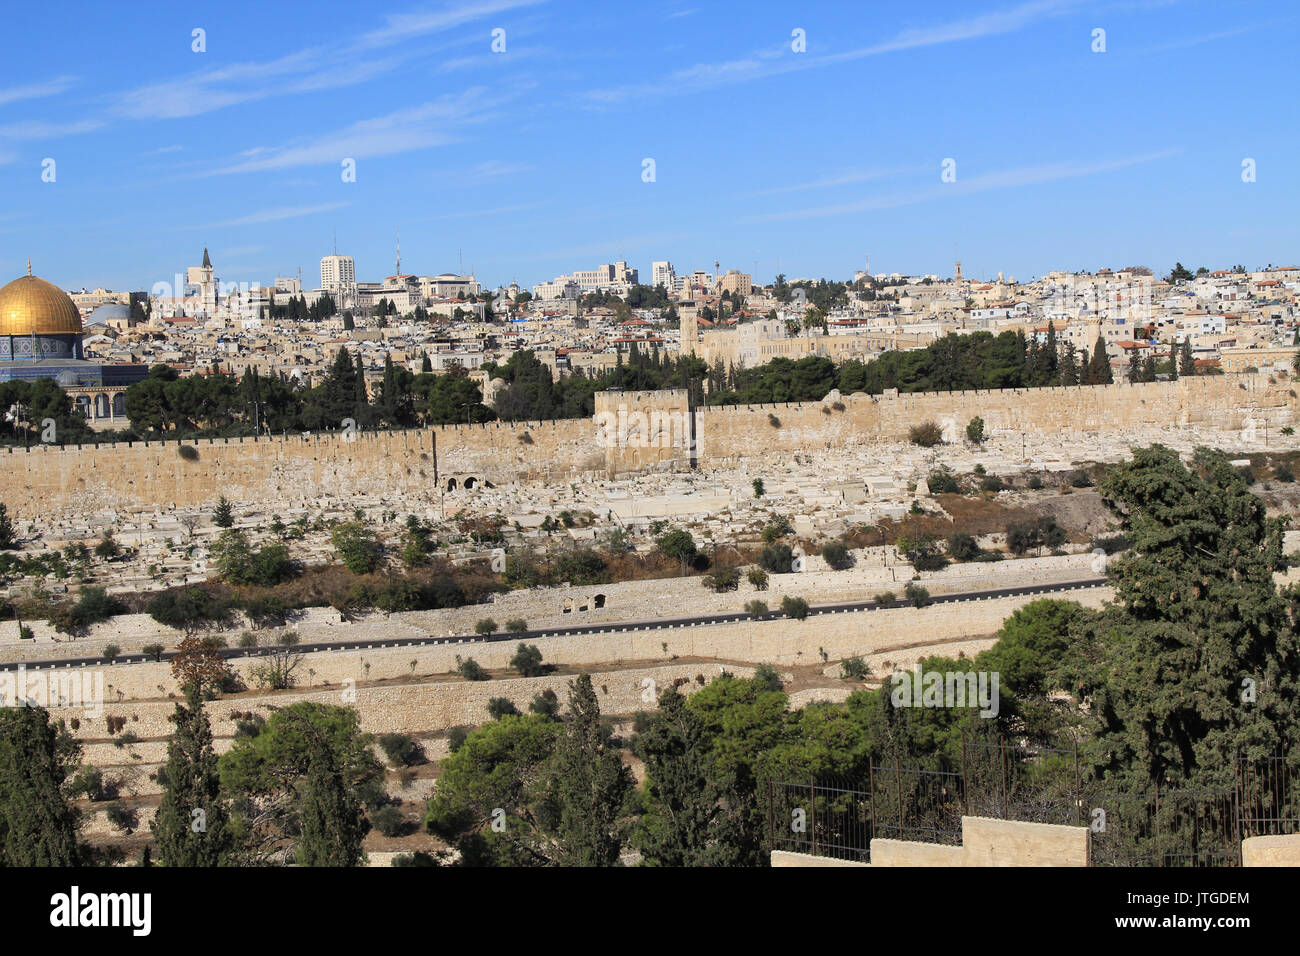 Dome of the Rock on the Temple Mount and Golden Gate as seen from the Mount of Olives in Israel. Stock Photo